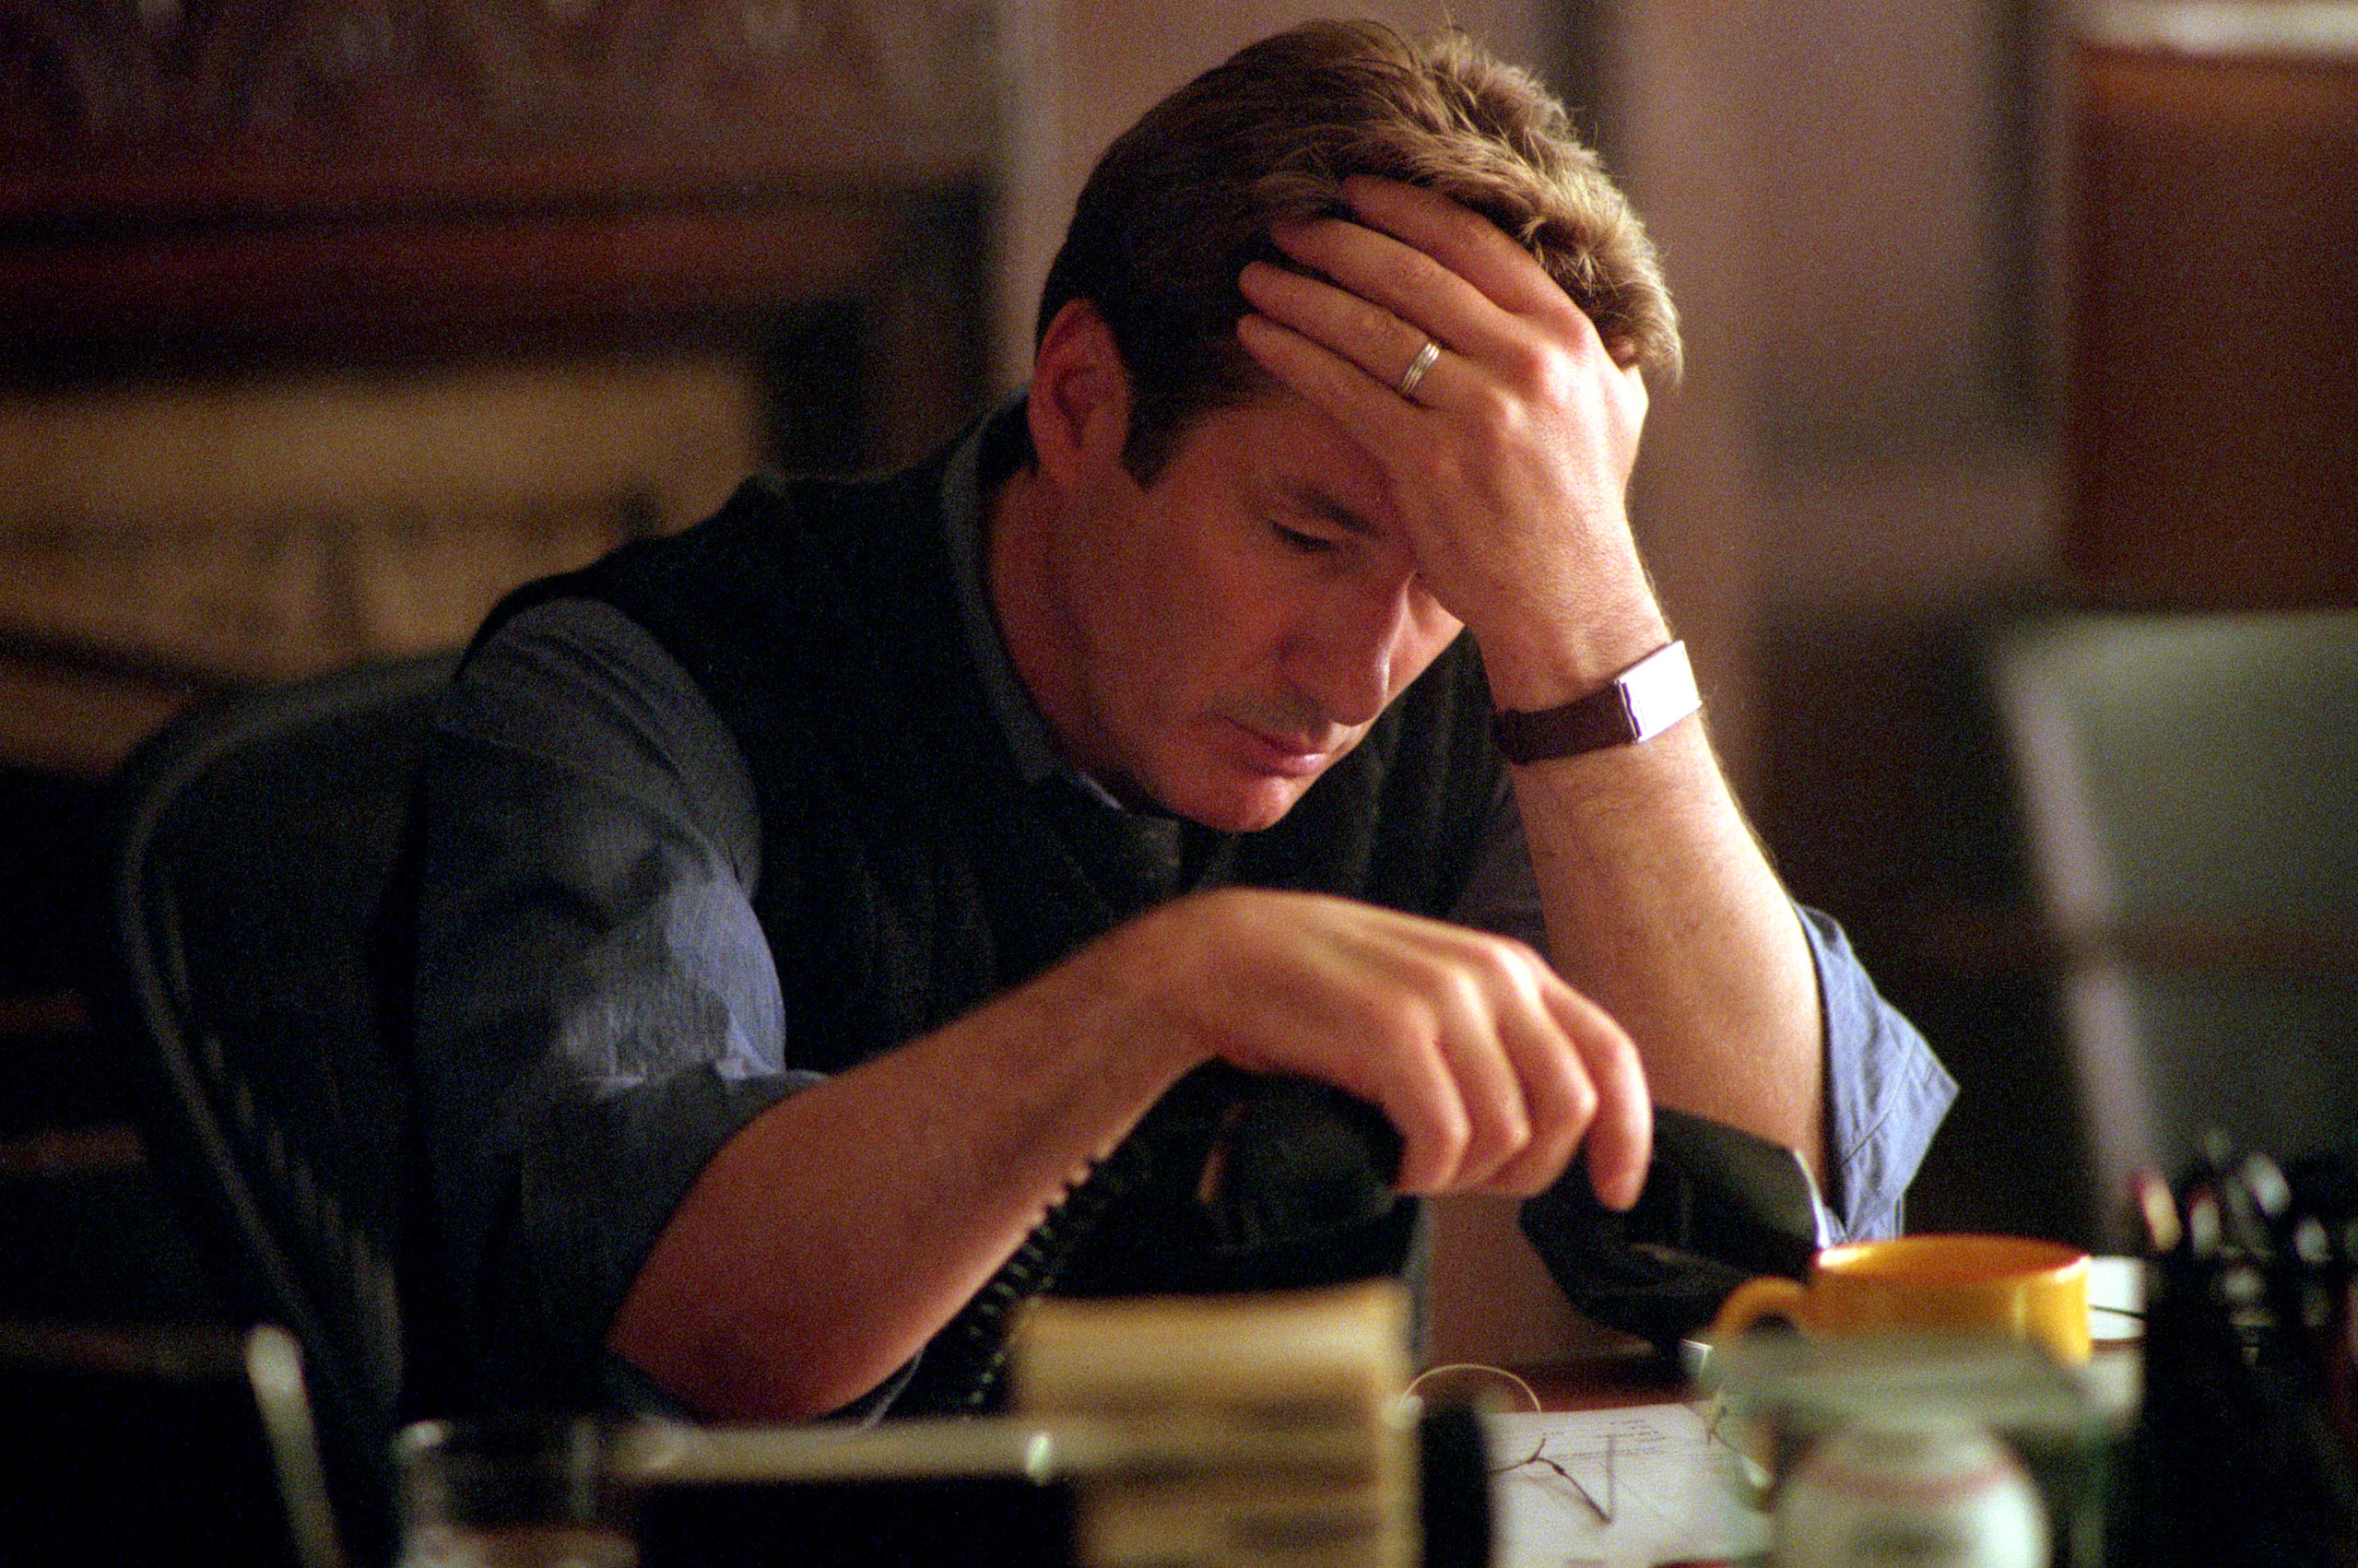 Richard Gere sits at a desk, looking stressed with his hand on his forehead, holding a phone. A yellow mug and documents are on the desk